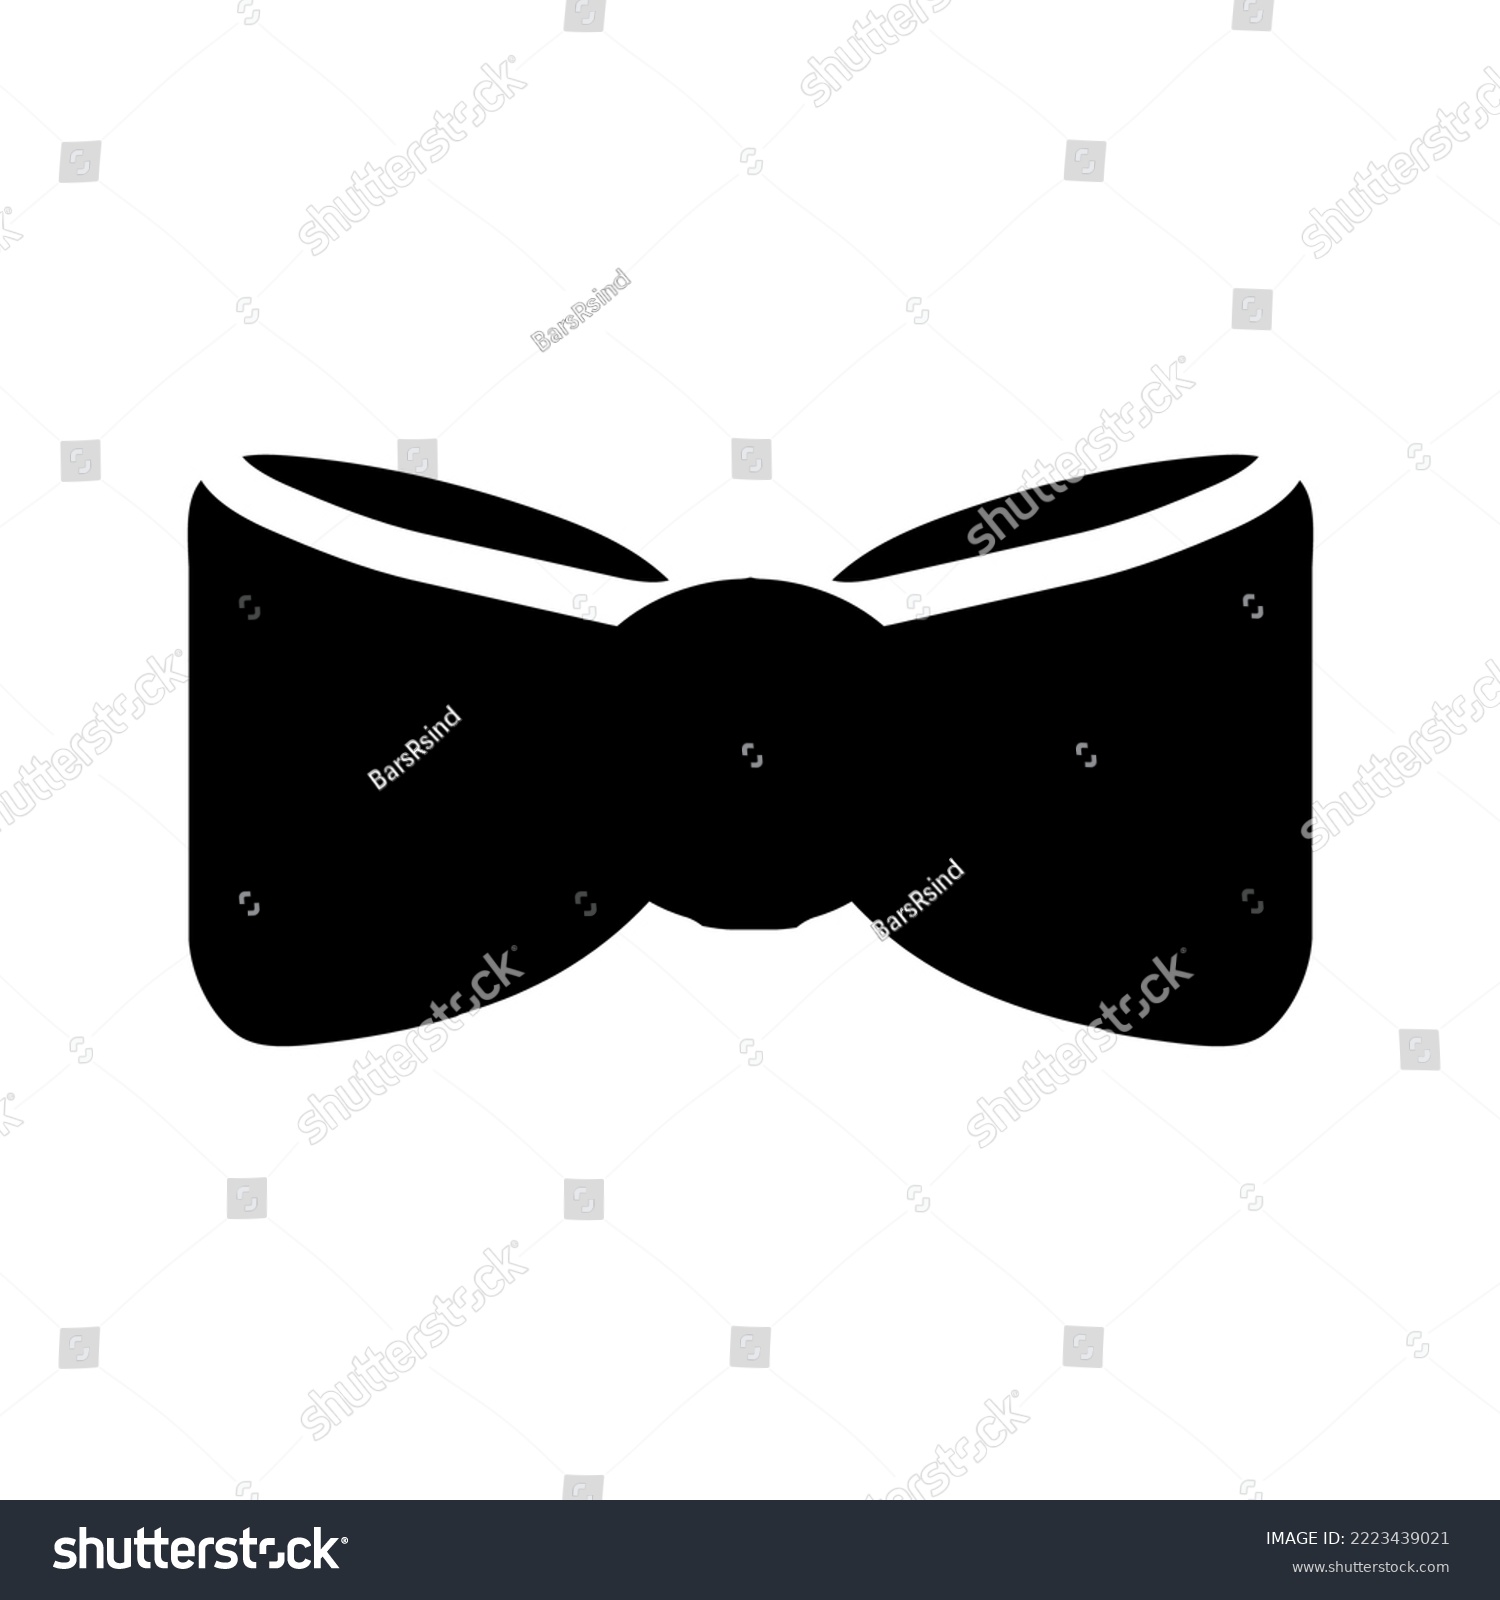 SVG of Bow christmas costume decor silhouette vector. Xmas decorative ribbon for decorate festival party suit. New year bowtie garment fashion ornament black and white flat cartoon illustration svg